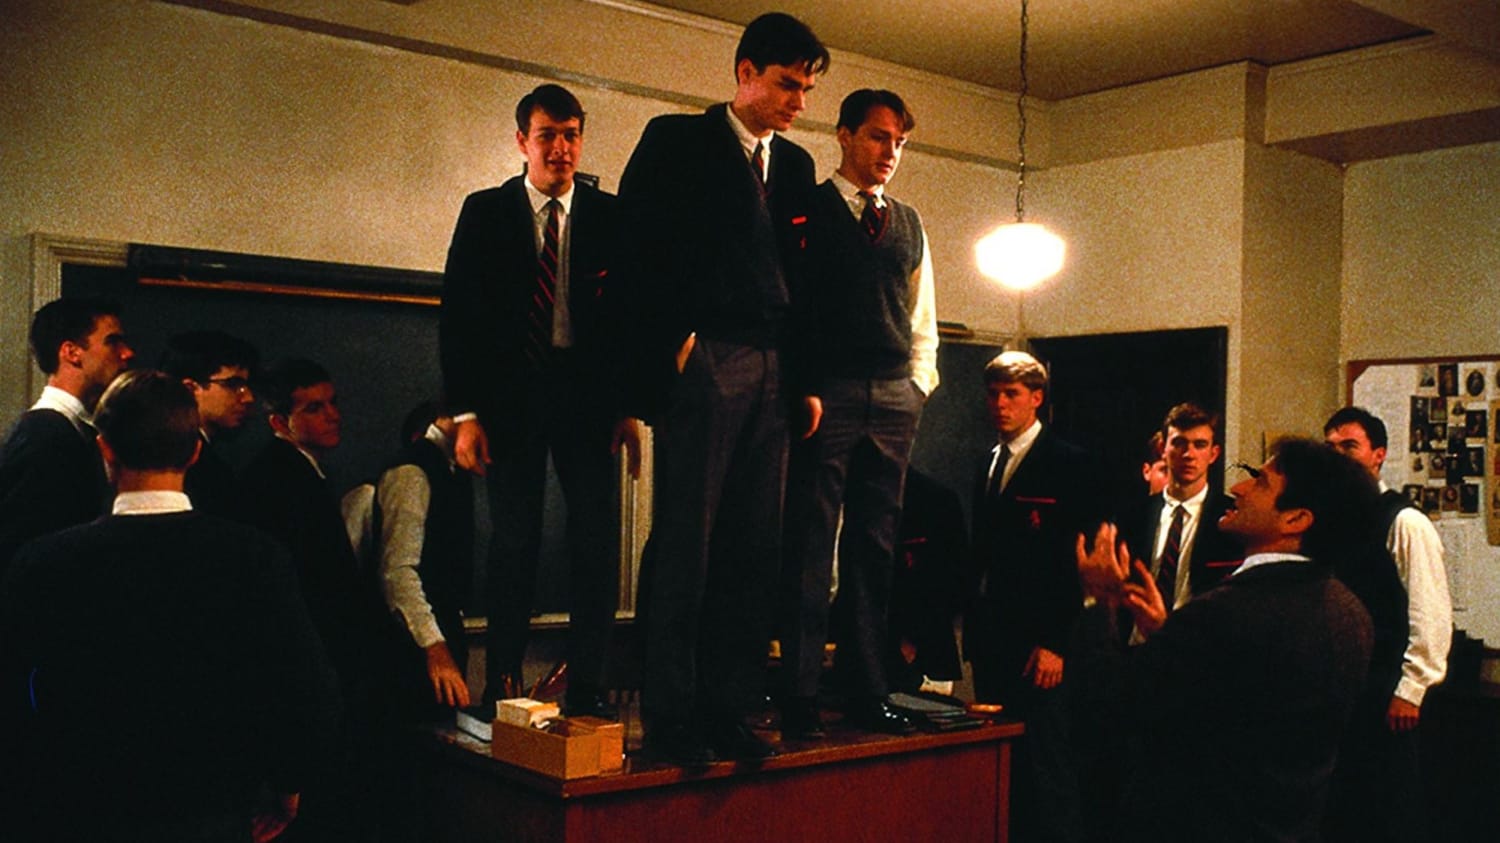 15 Facts About Dead Poets Society On Its 30th Anniversary